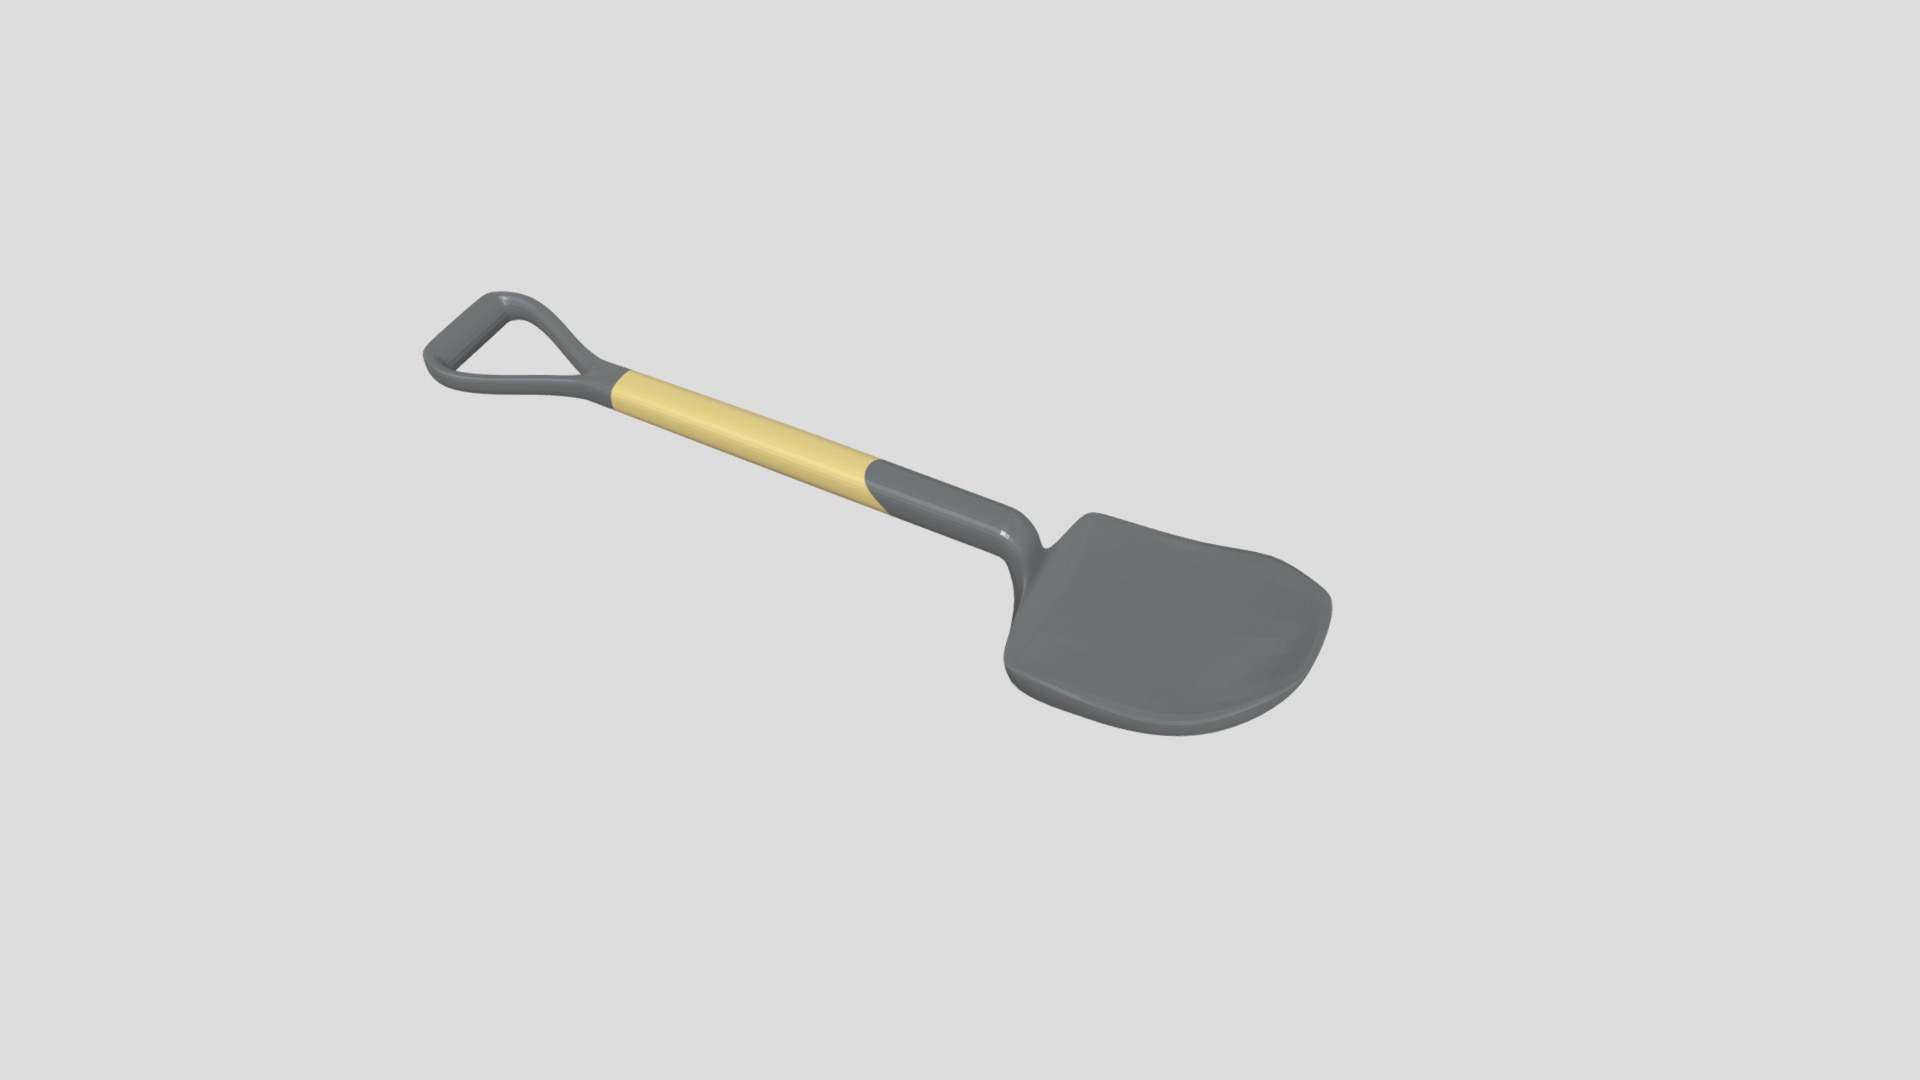 3D model Shovel - This is a 3D model of the Shovel. The 3D model is about a black and yellow stapler.